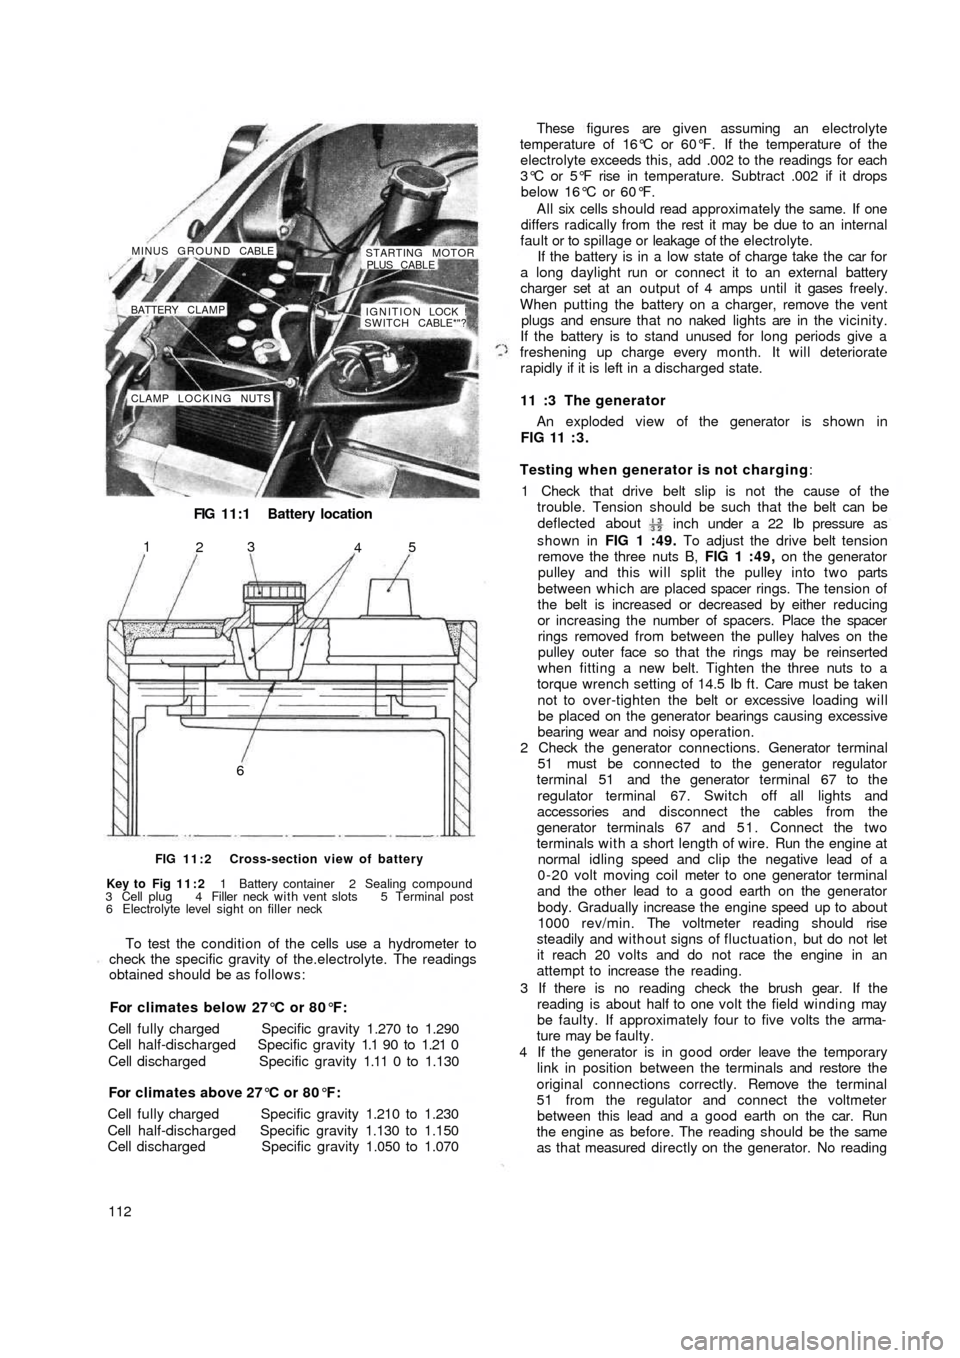 FIAT 500 1957 1.G Owners Guide FIG 11:1 Battery location
CLAMP LOCKING NUTSIGNITION LOCK !
SWITCH CABLE*"? BATTERY CLAMP MINUS GROUND CABLE
STARTING MOTOR
PLUS CABLE
65
4 3
2 1
FIG 11:2 Cross-section view of battery
Key to  Fig  11